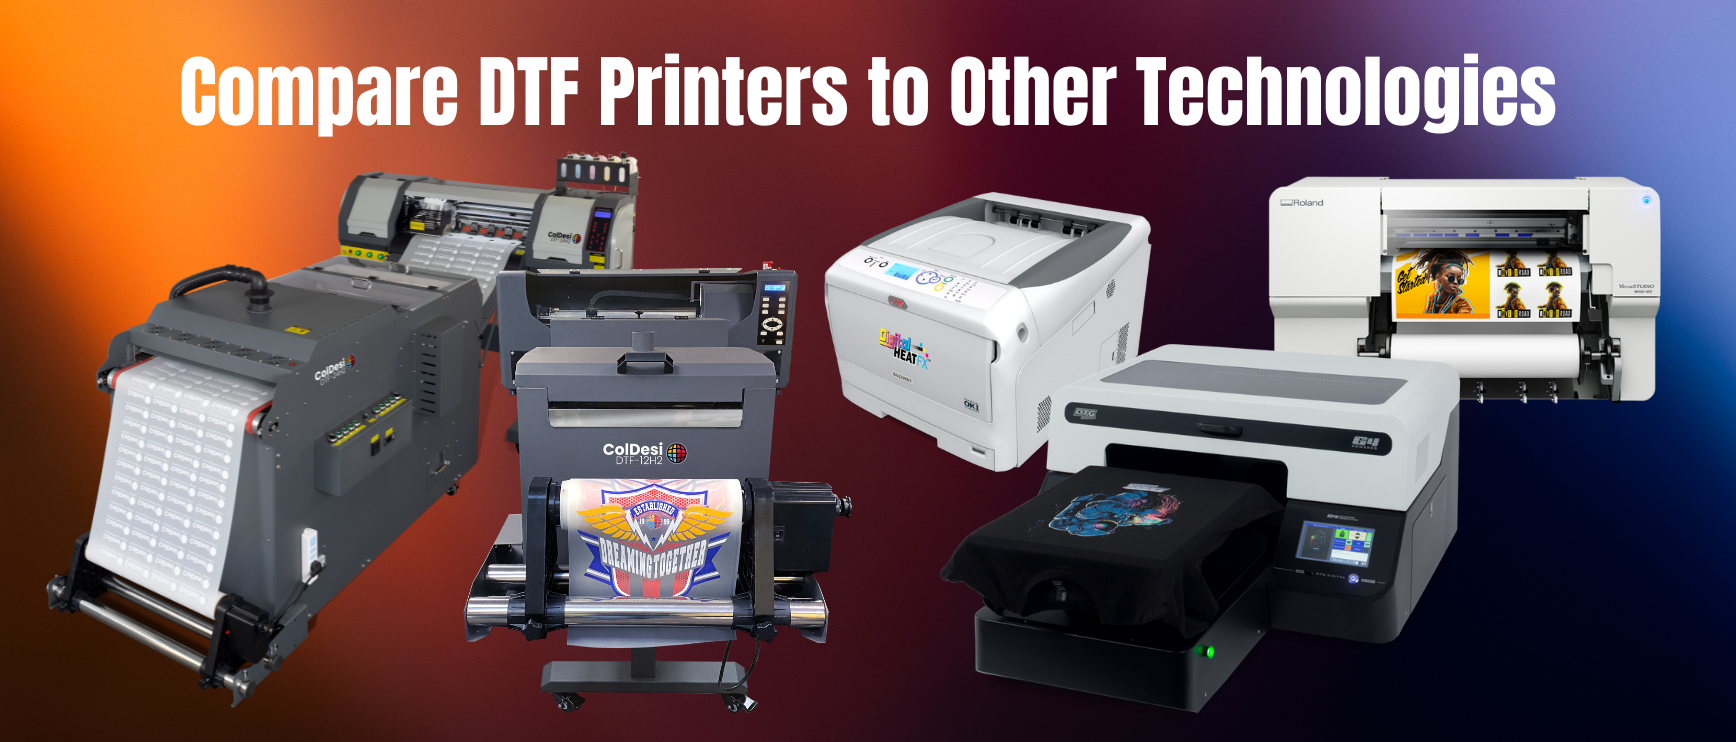 Compare DTF Printers to Other Technologies